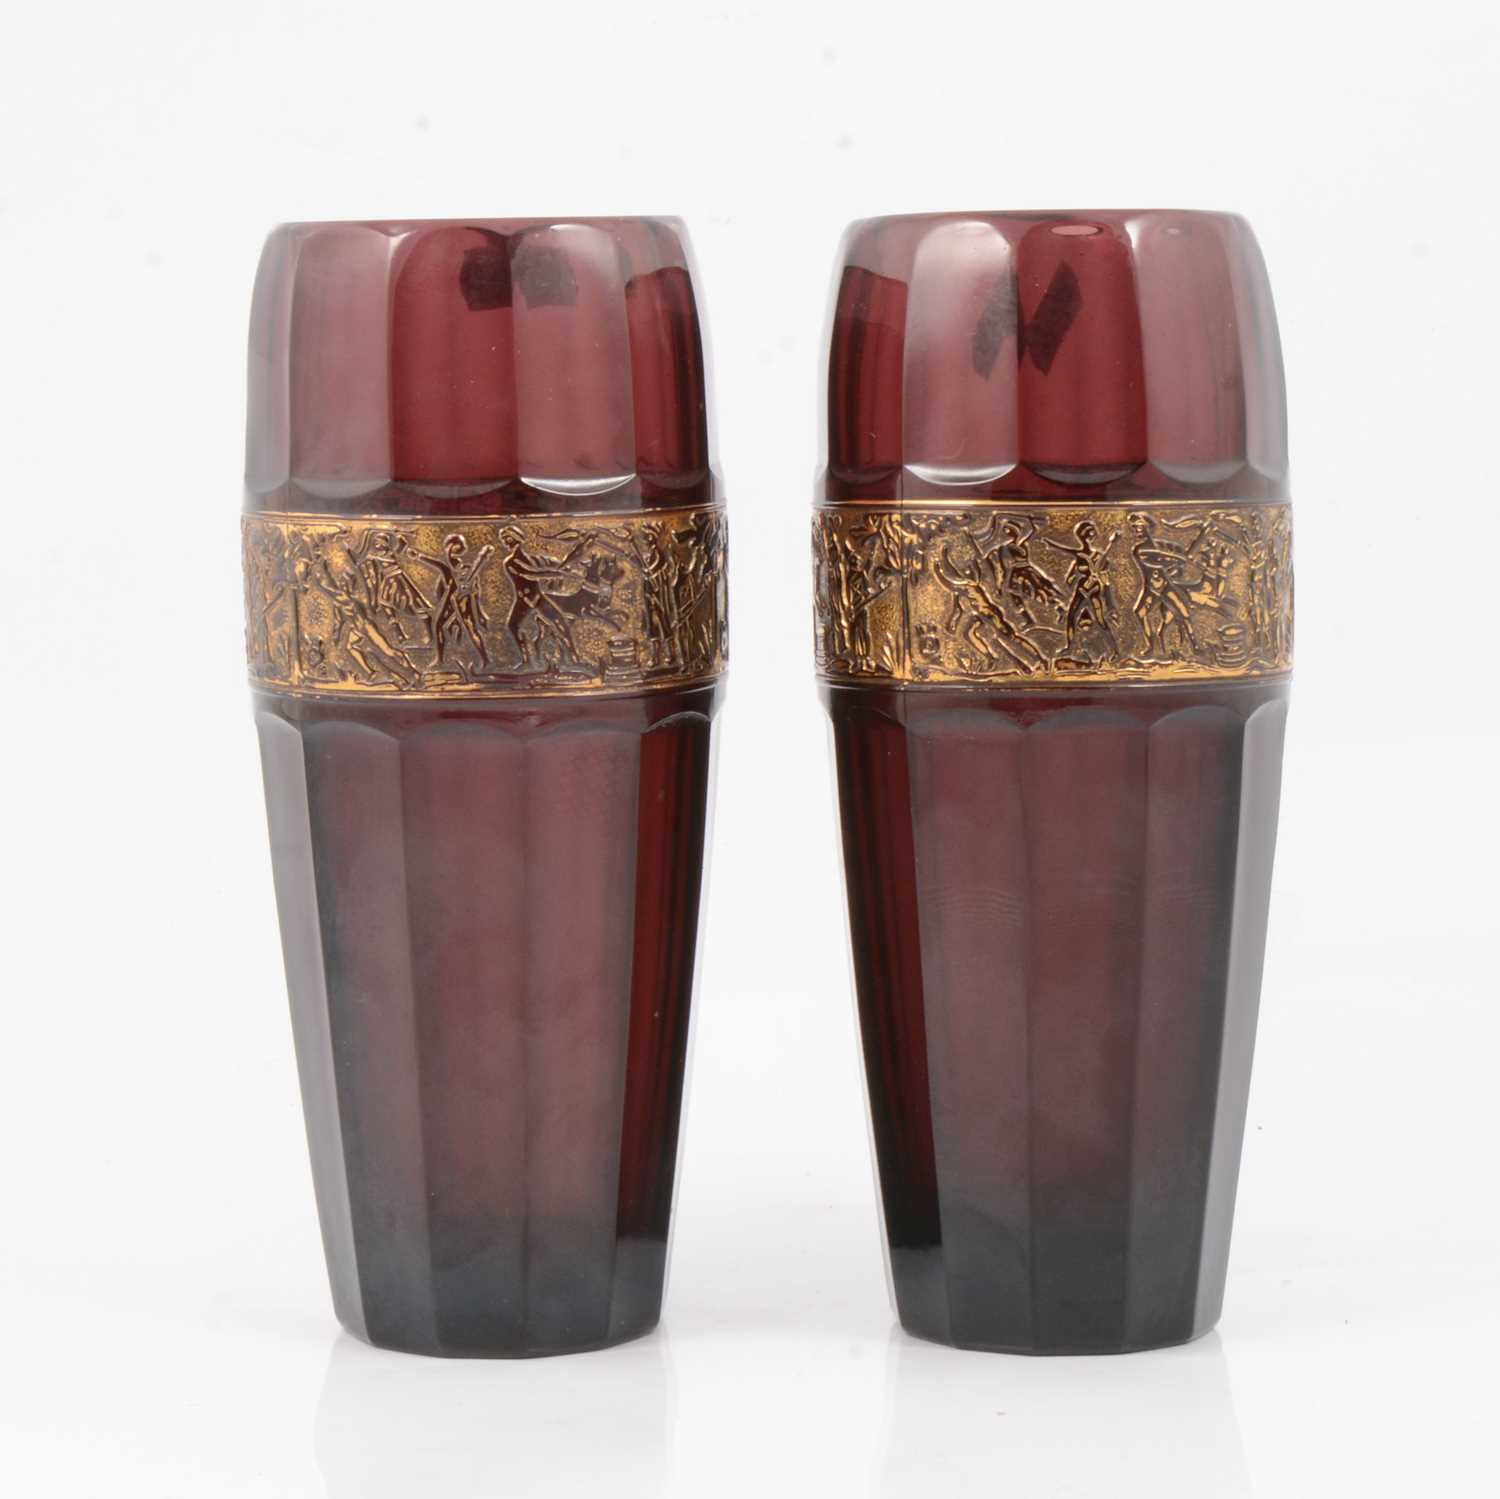 Lot 158 - Pair of amethyst glass vases, by Walter & Sohne, circa 1950.